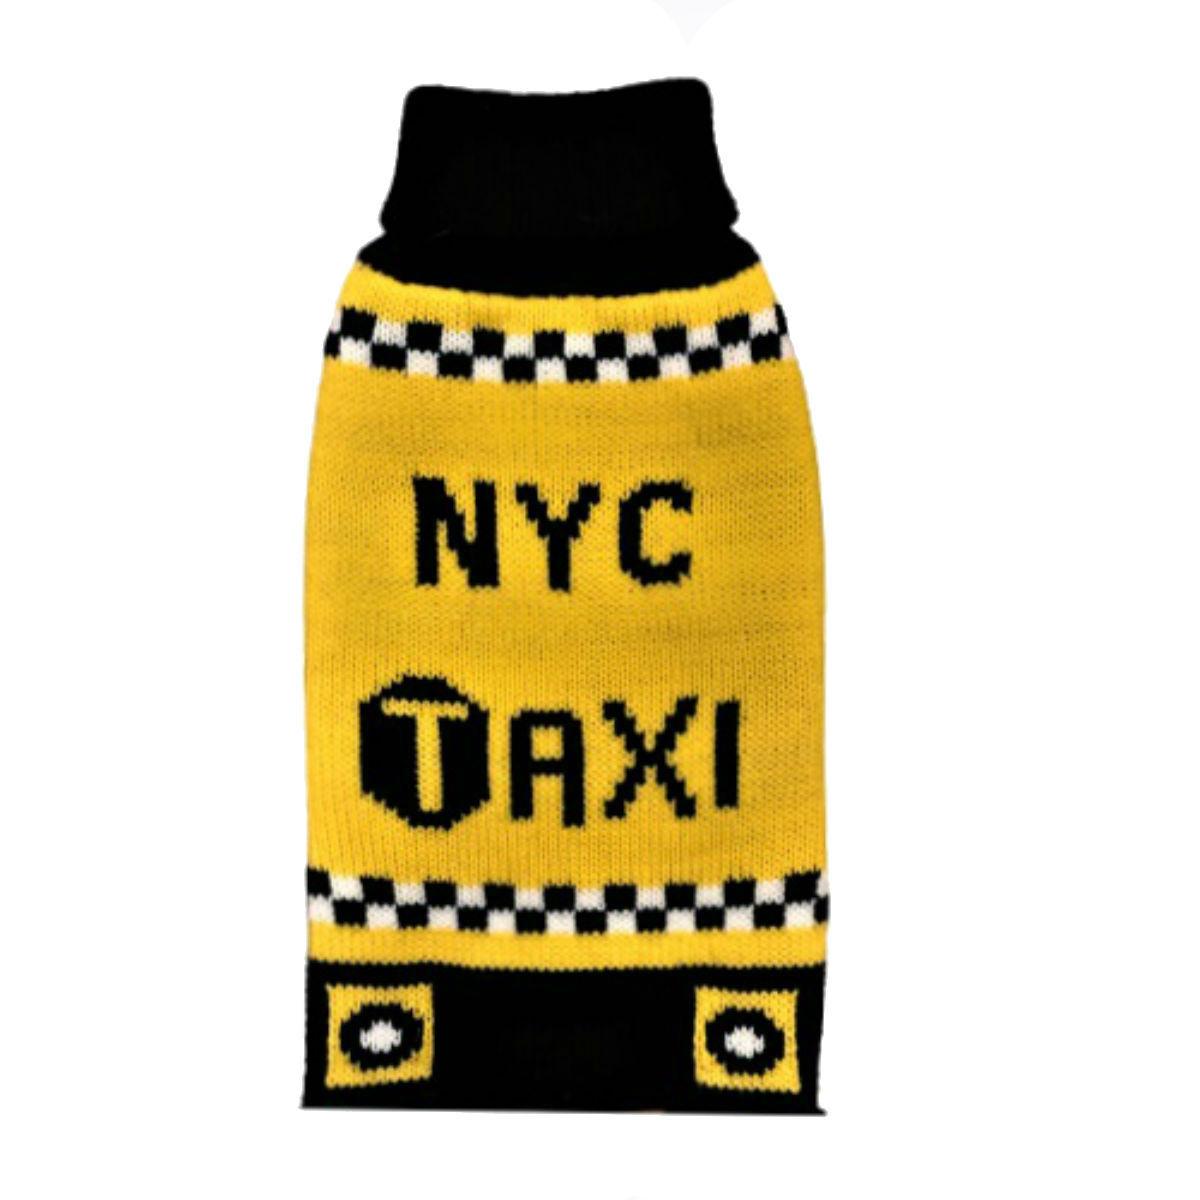 Dallas Dogs NYC Taxi Dog Sweater